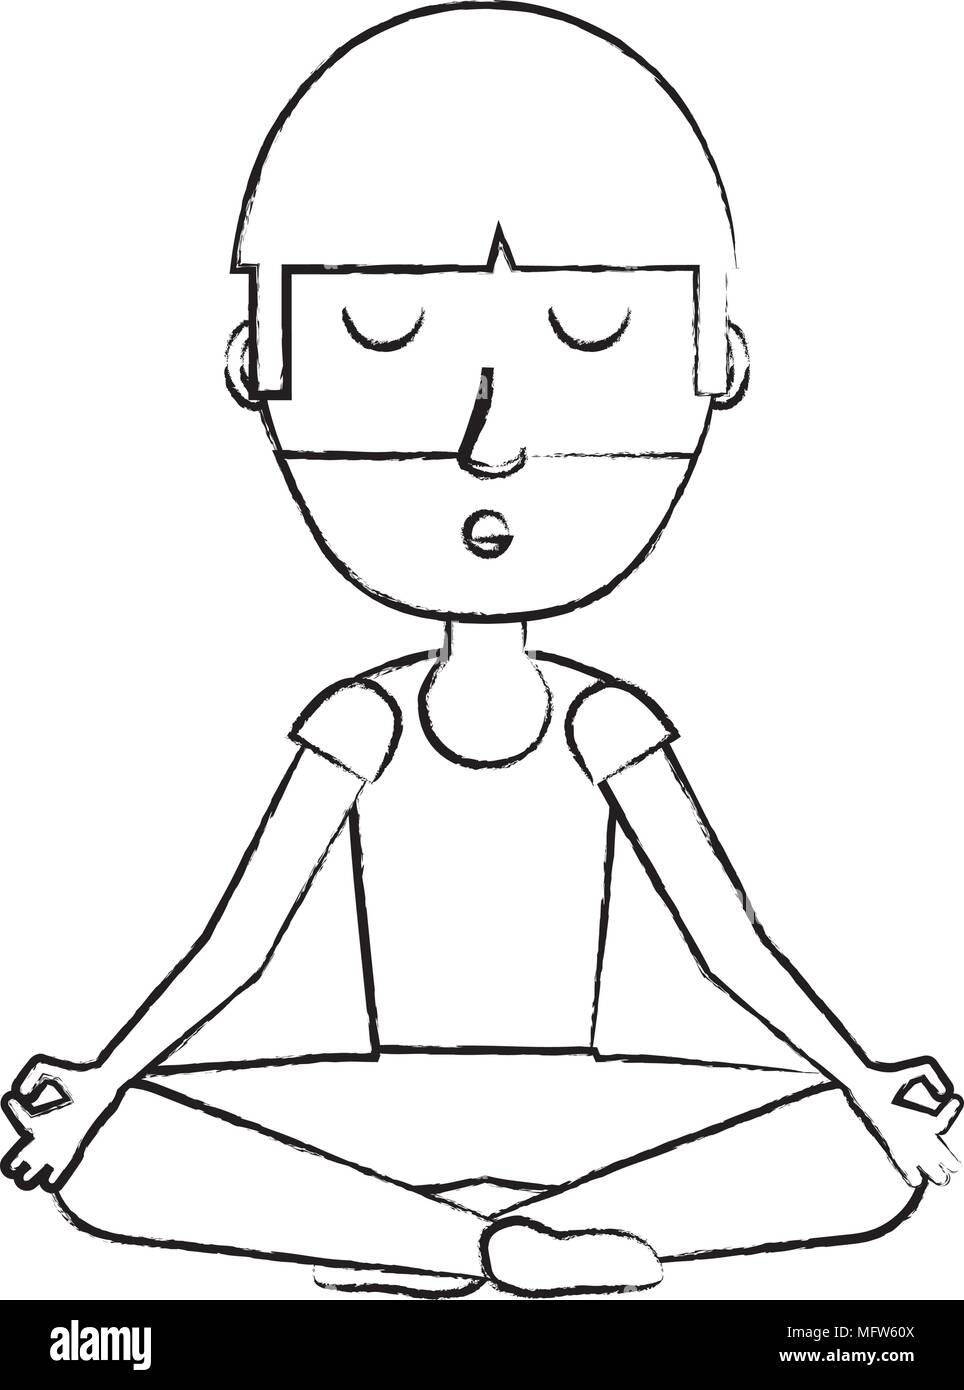 sketch of cartoon man doing lotus position over white background, vector illustration Stock Vector